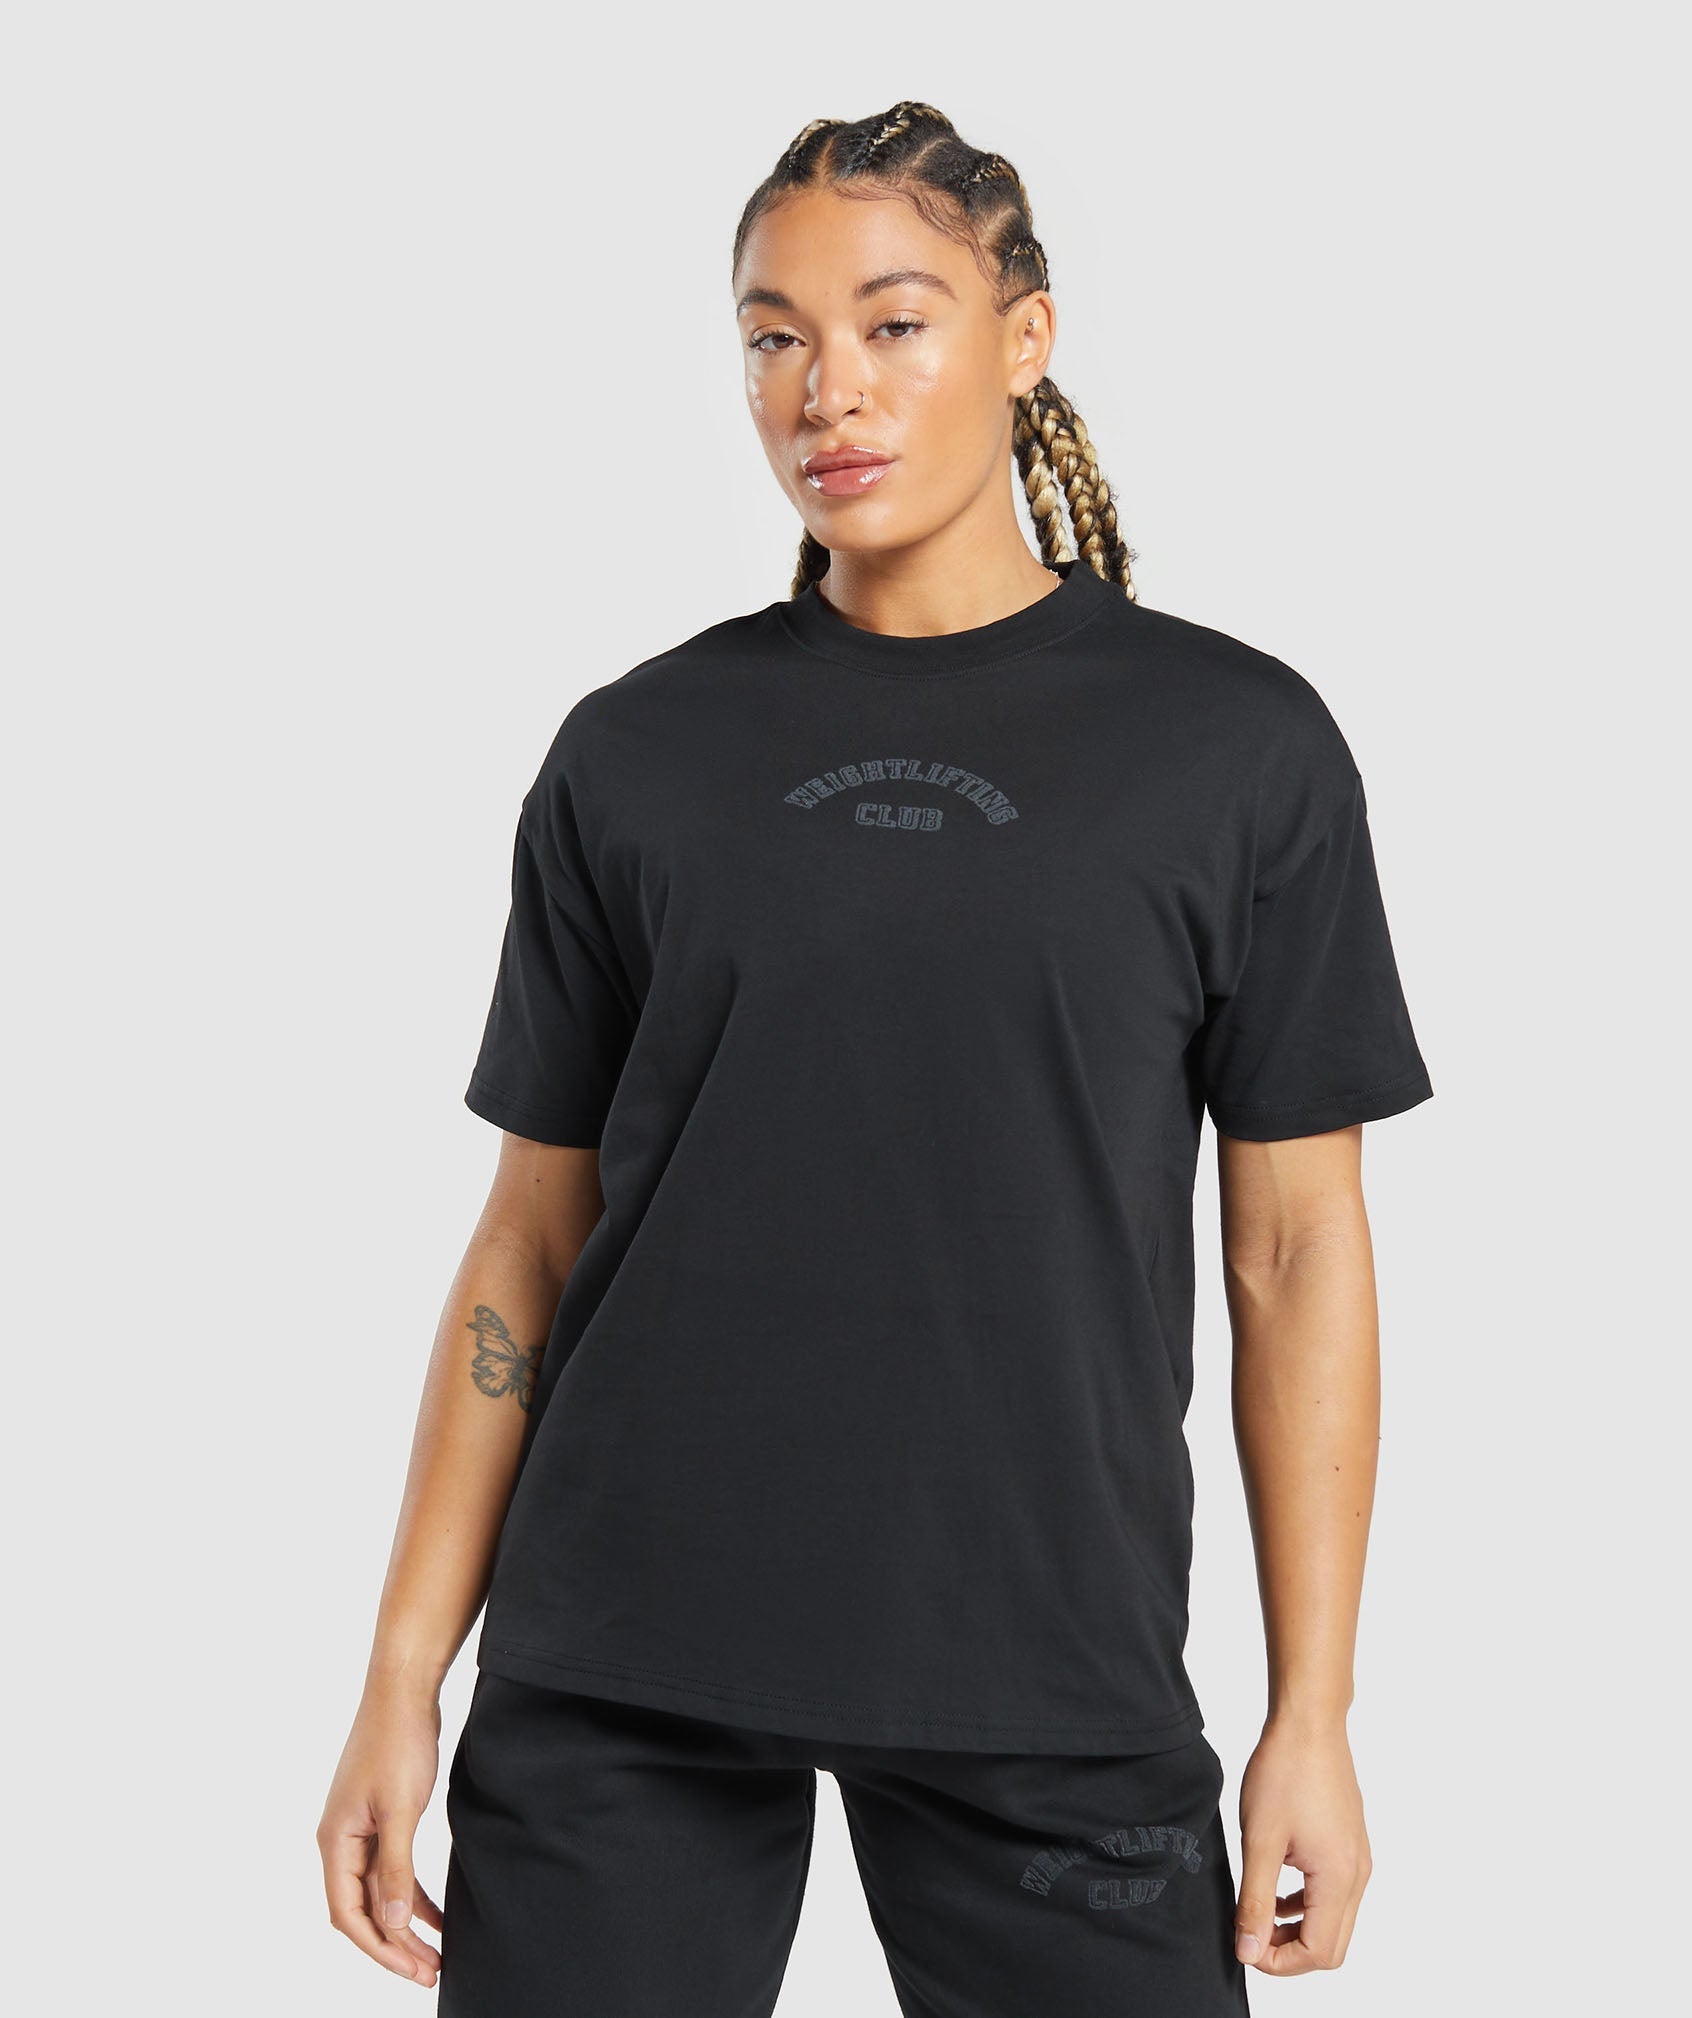 Weightlifting Oversized T-Shirt in Black - view 1